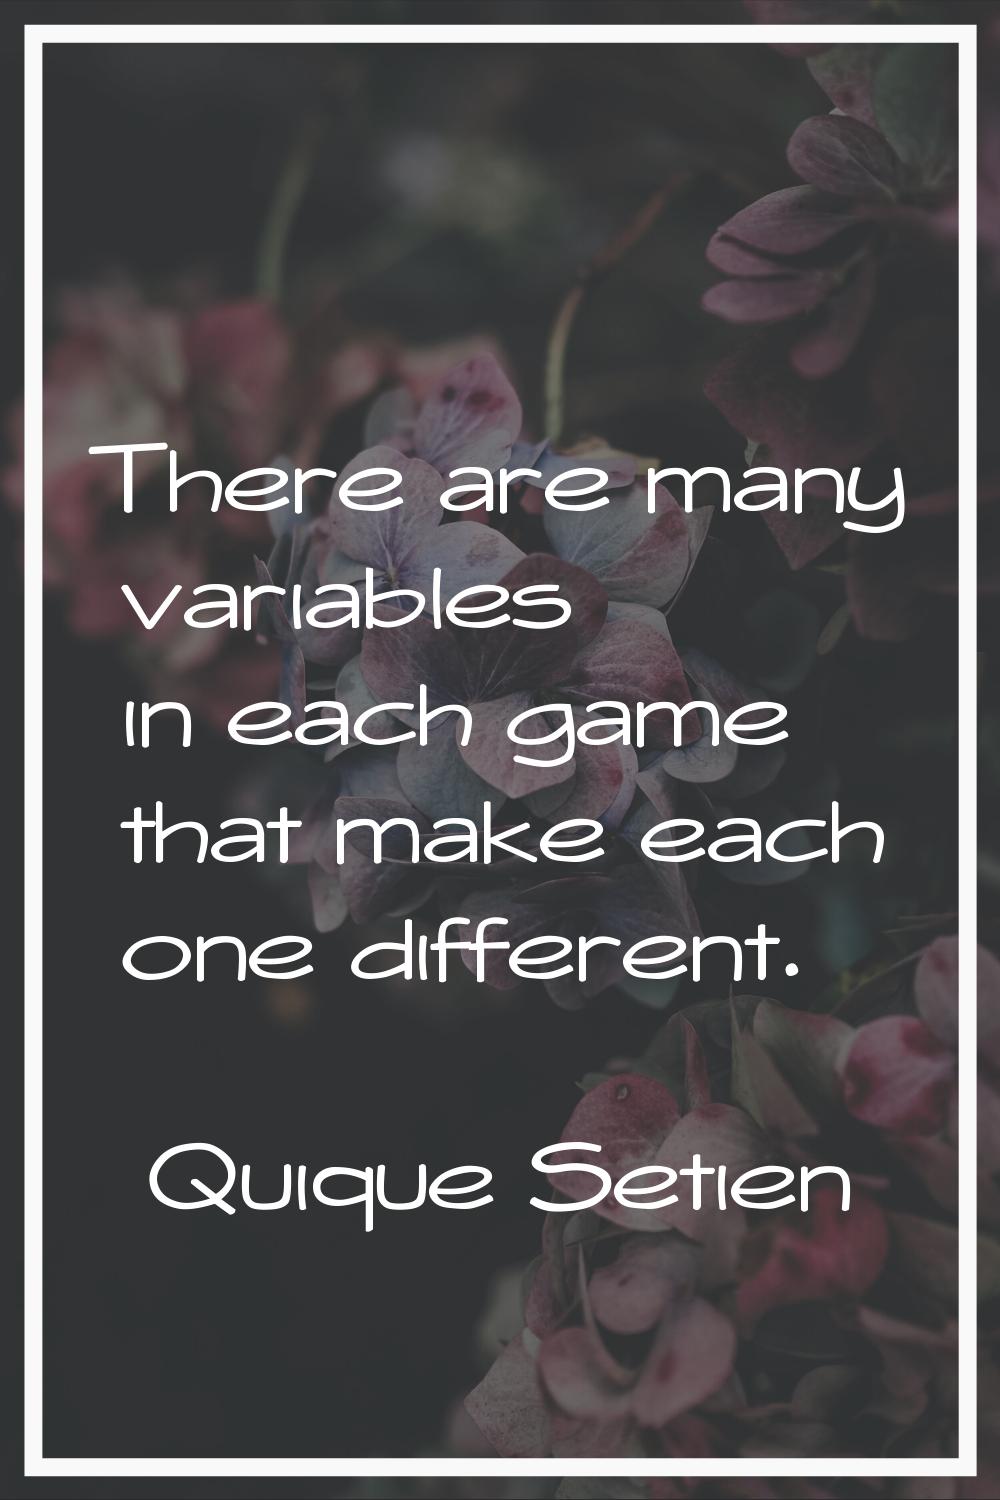 There are many variables in each game that make each one different.